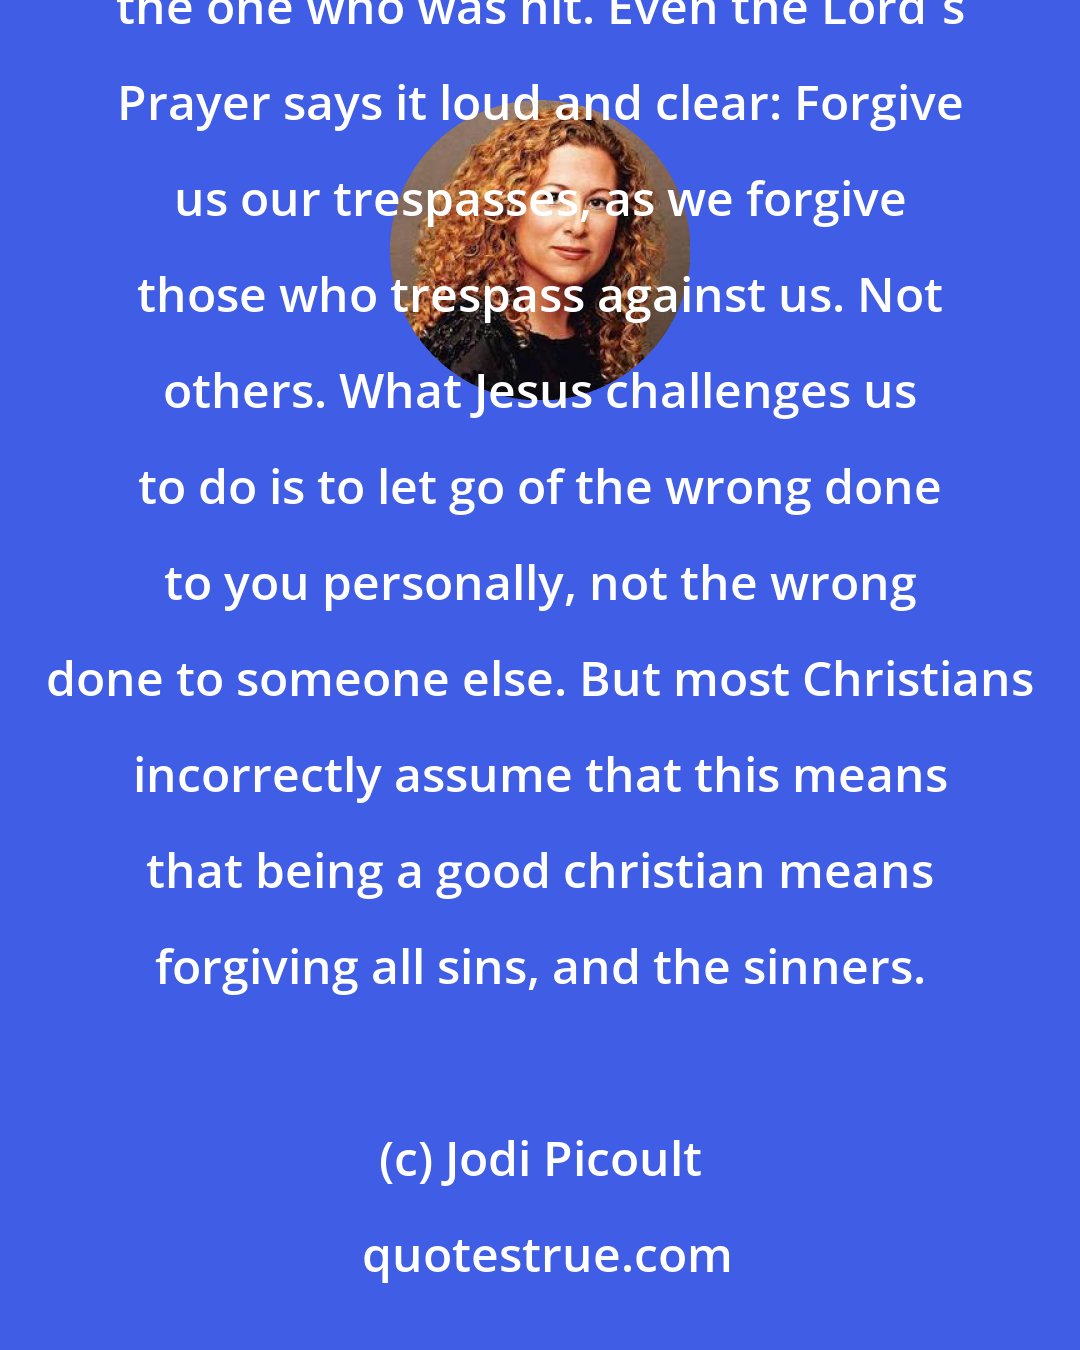 Jodi Picoult: You know, Sage, Jesus didn't tell us to forgive everyone. He said turn the other cheek, but only if you the one who was hit. Even the Lord's Prayer says it loud and clear: Forgive us our trespasses, as we forgive those who trespass against us. Not others. What Jesus challenges us to do is to let go of the wrong done to you personally, not the wrong done to someone else. But most Christians incorrectly assume that this means that being a good christian means forgiving all sins, and the sinners.